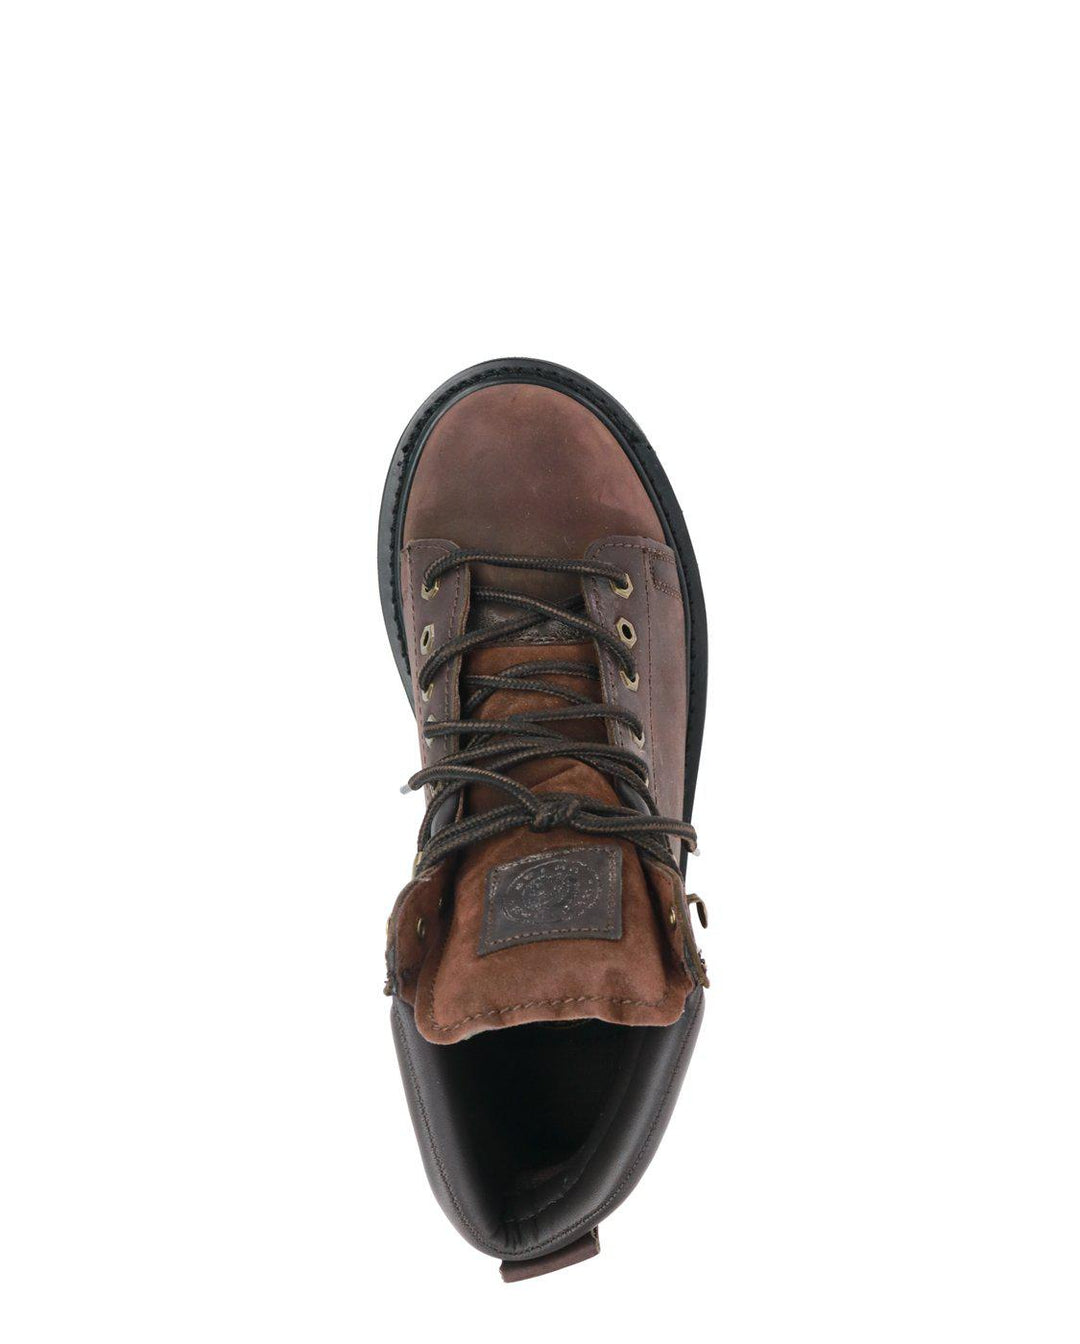 Men's Expedition Work Boot - Brown - Western Chief